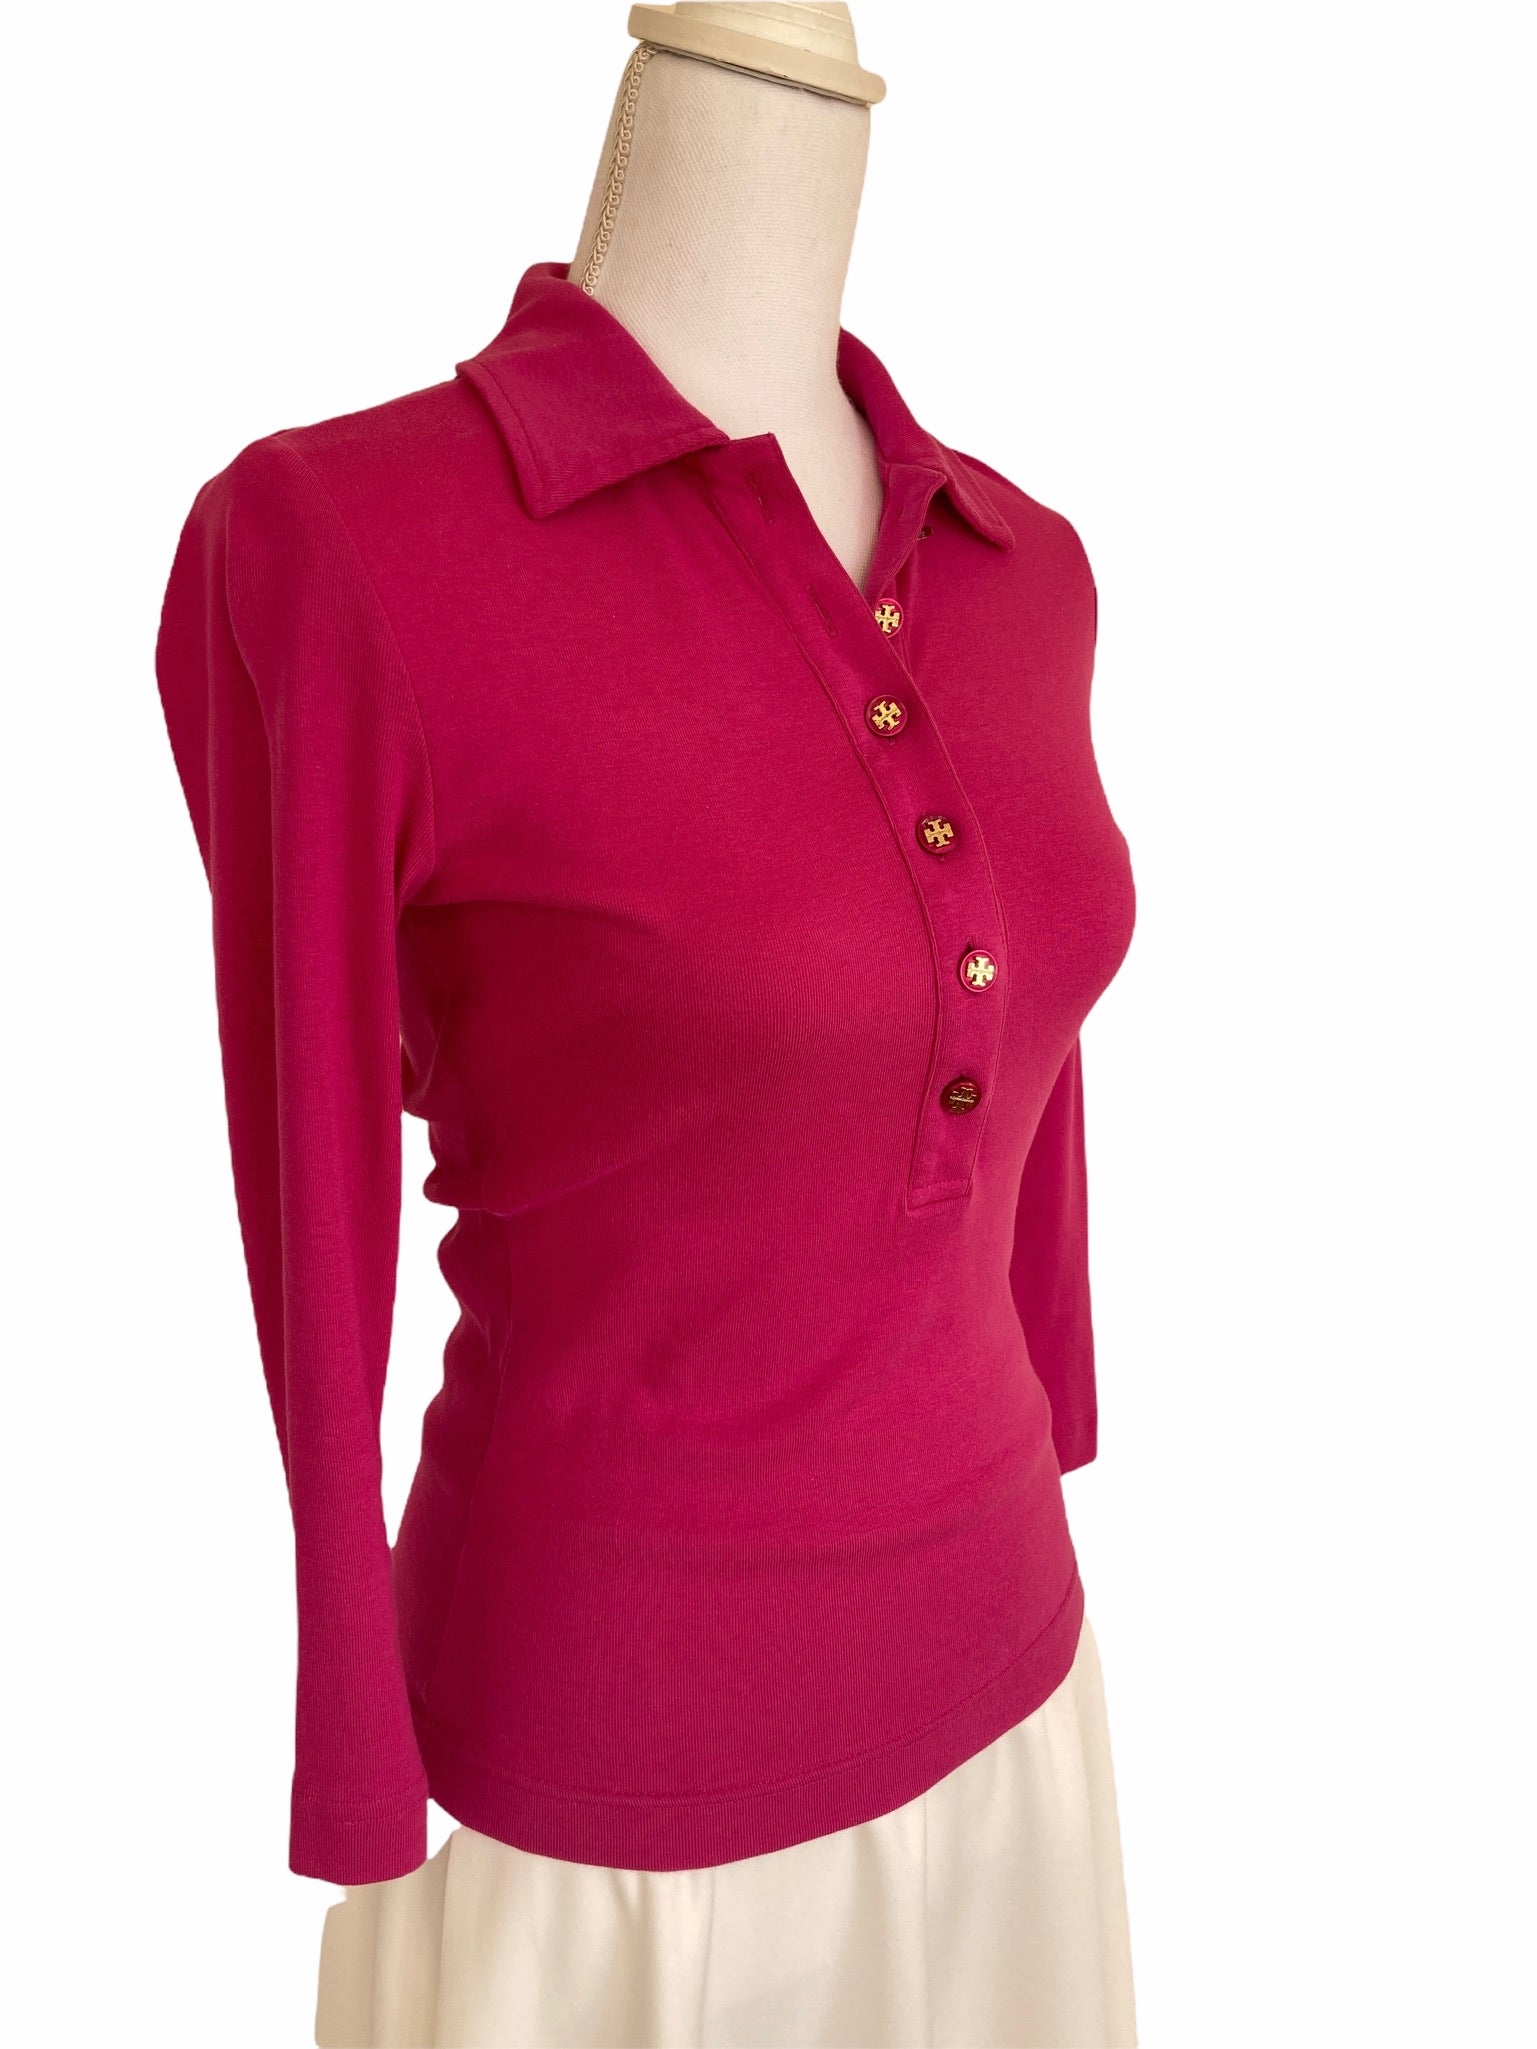 Tory Burch Pink Polo, S